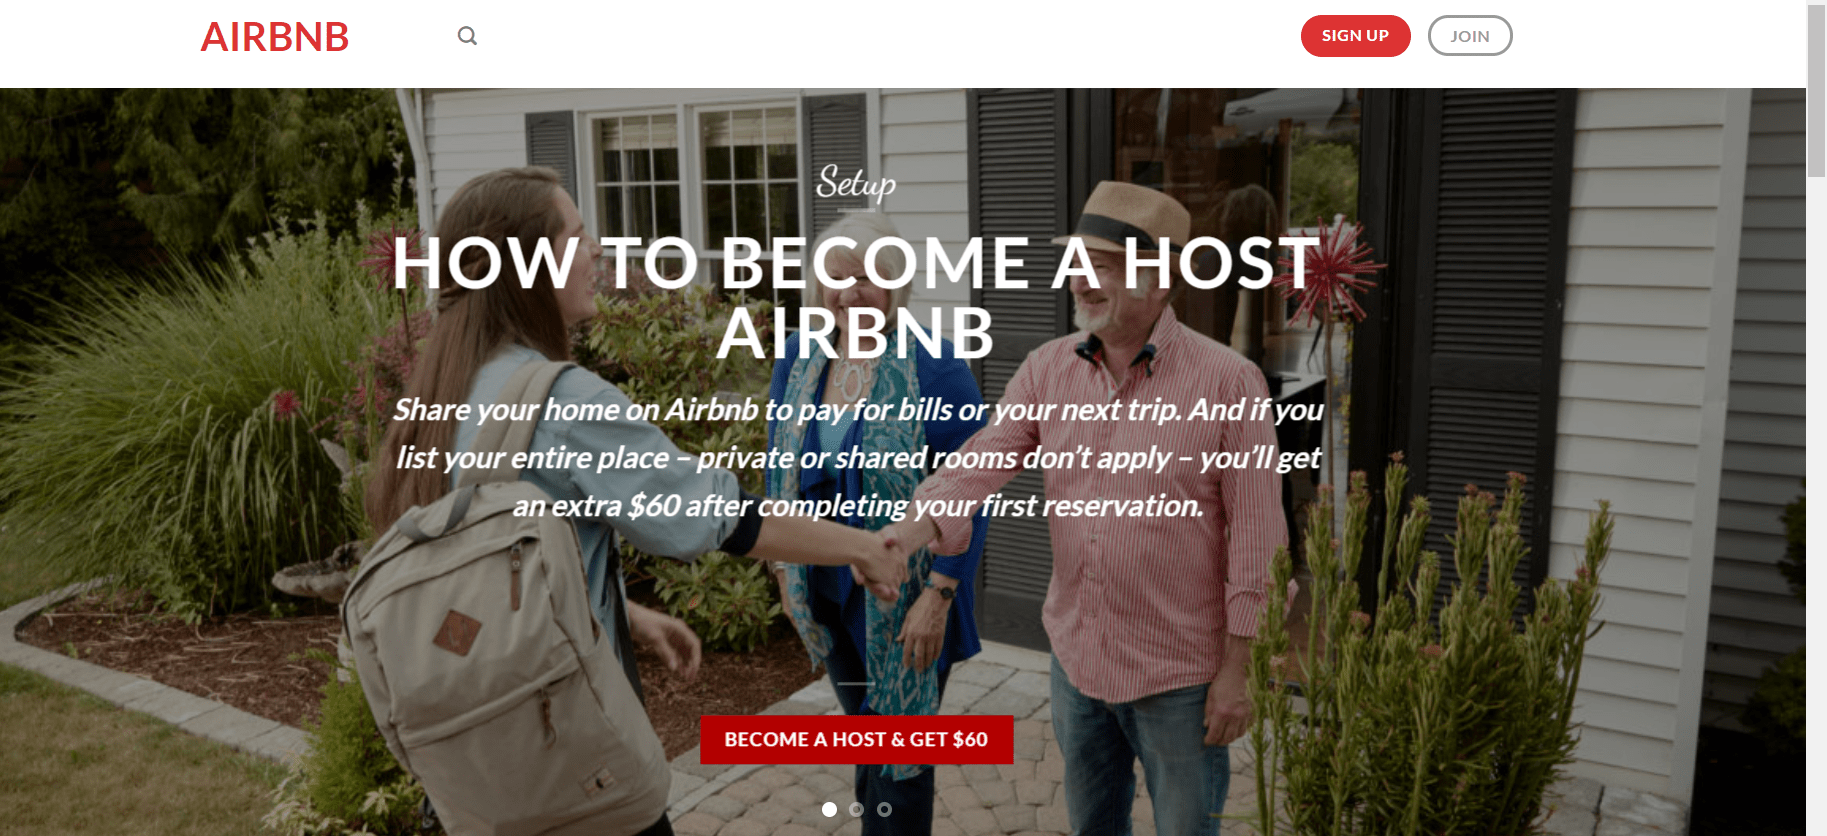  Airbnb overview